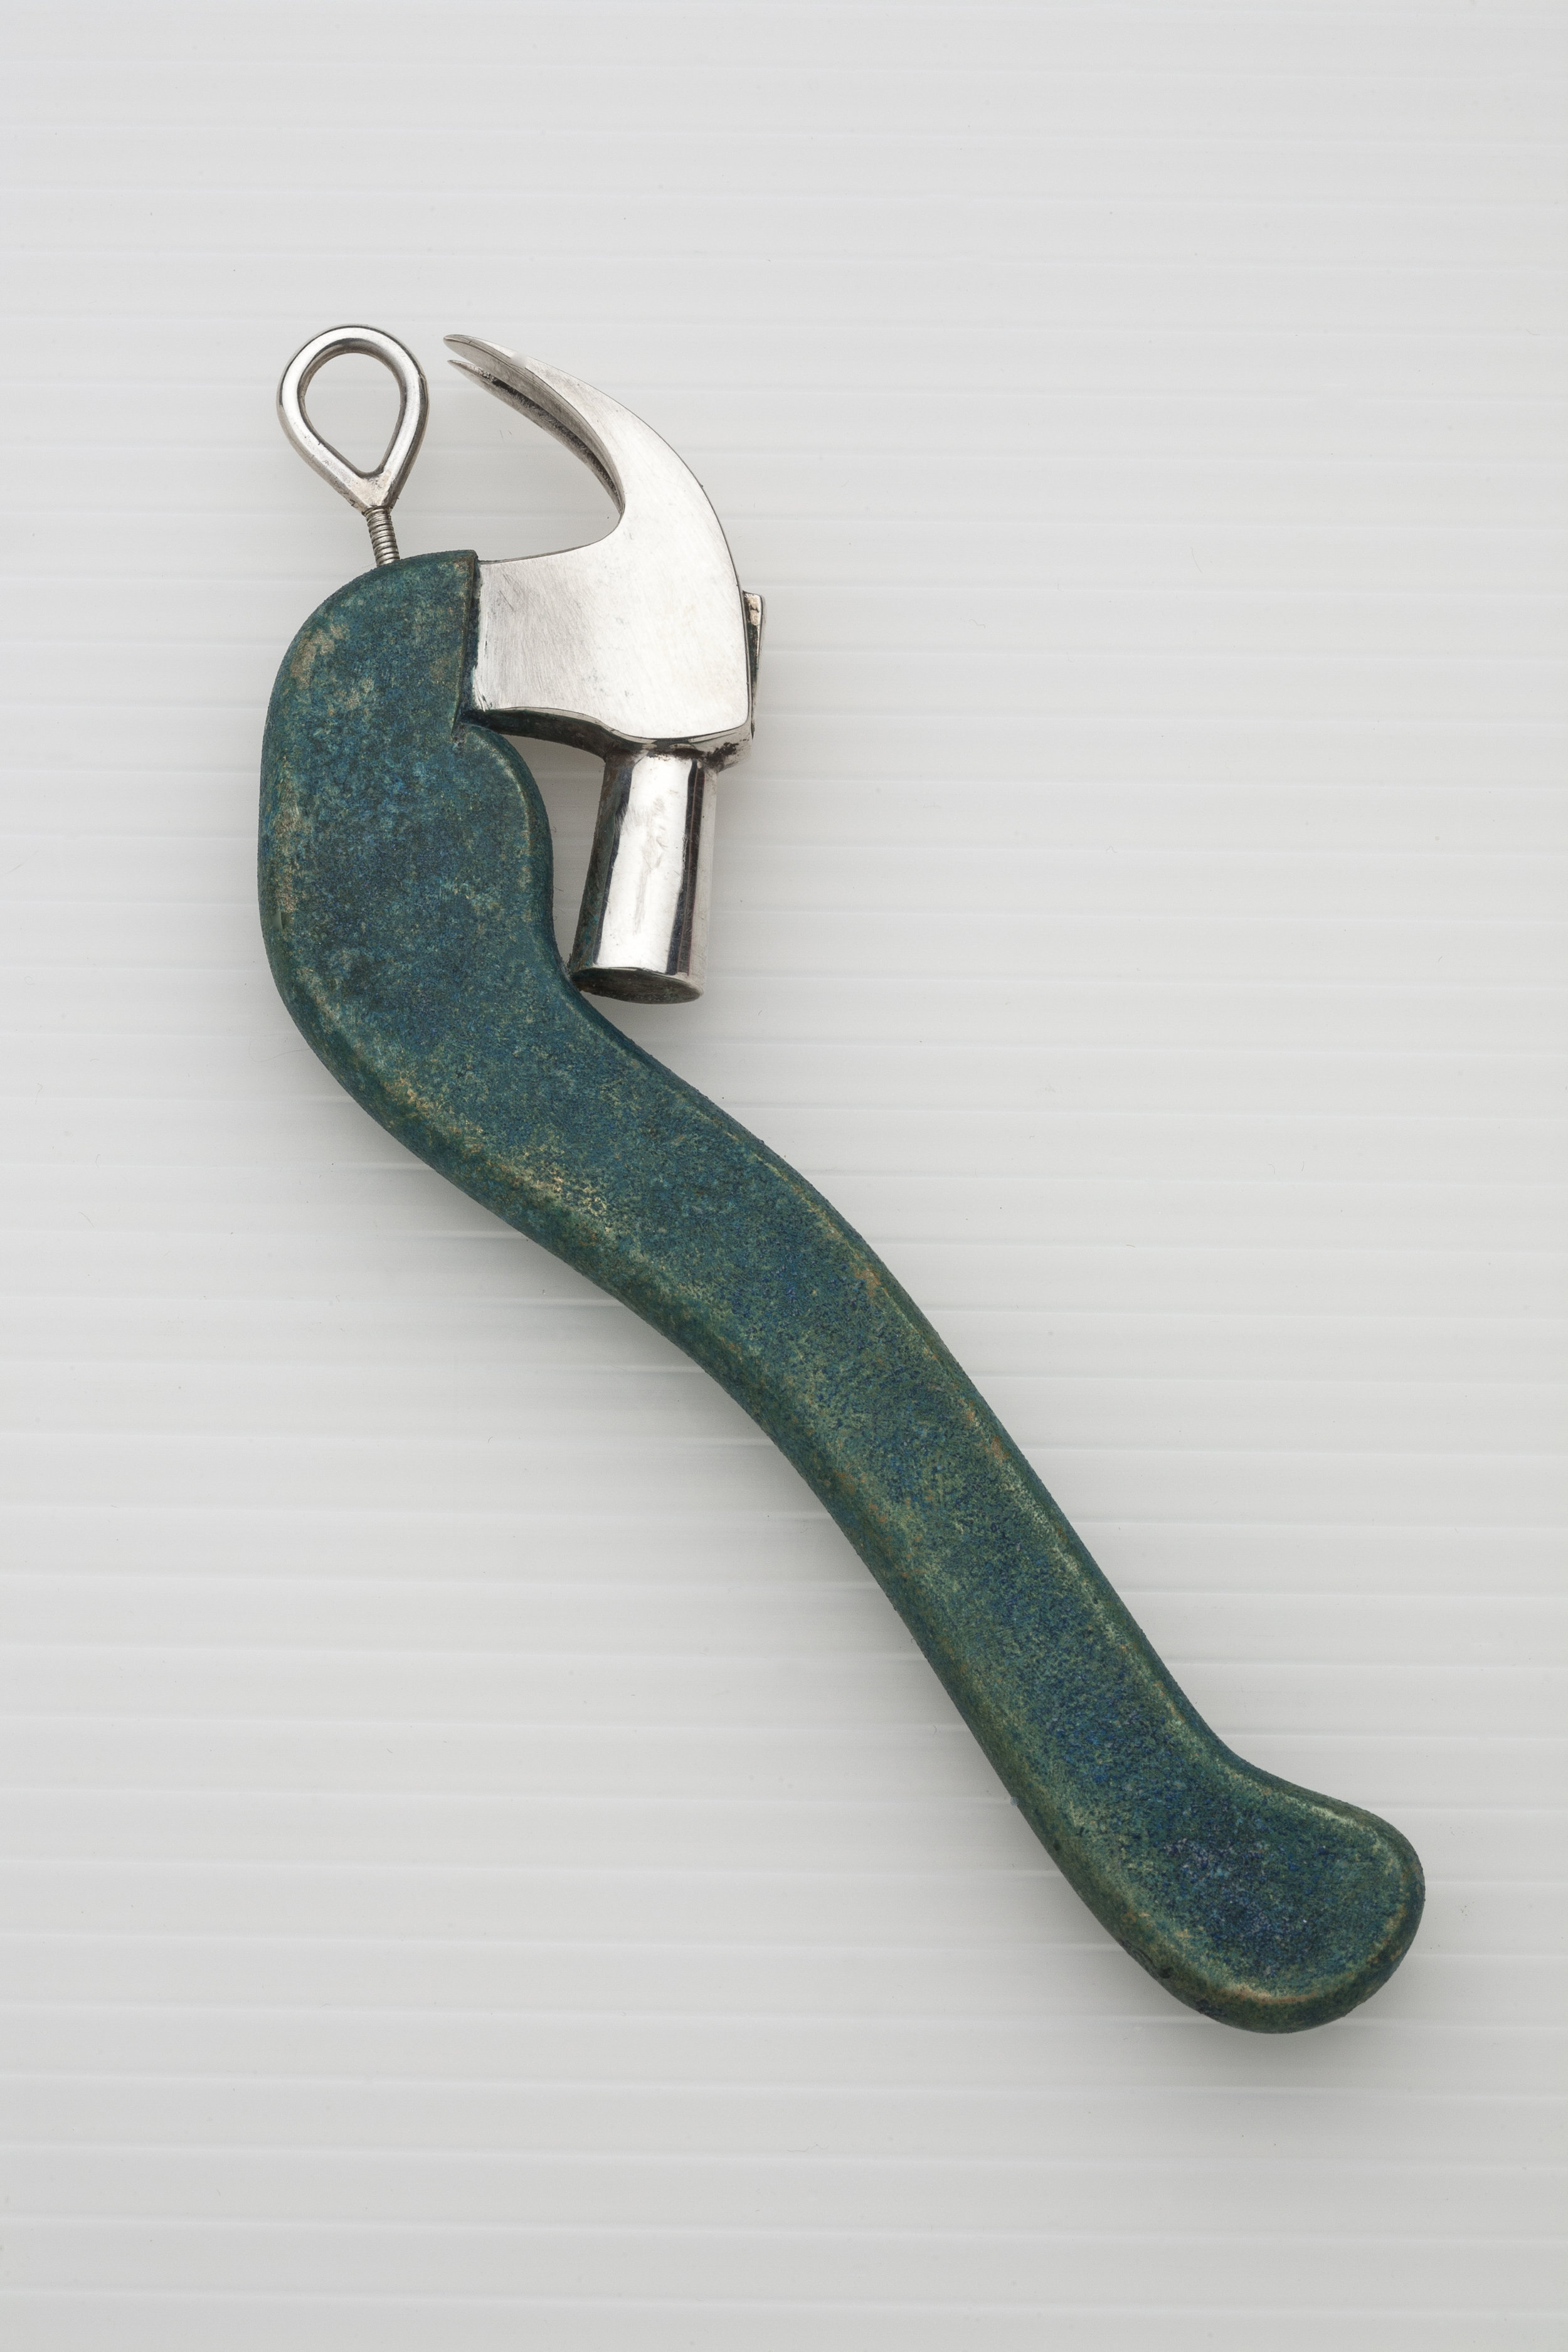  sterling silver, patinated bronze  2” x .75” x .13” 